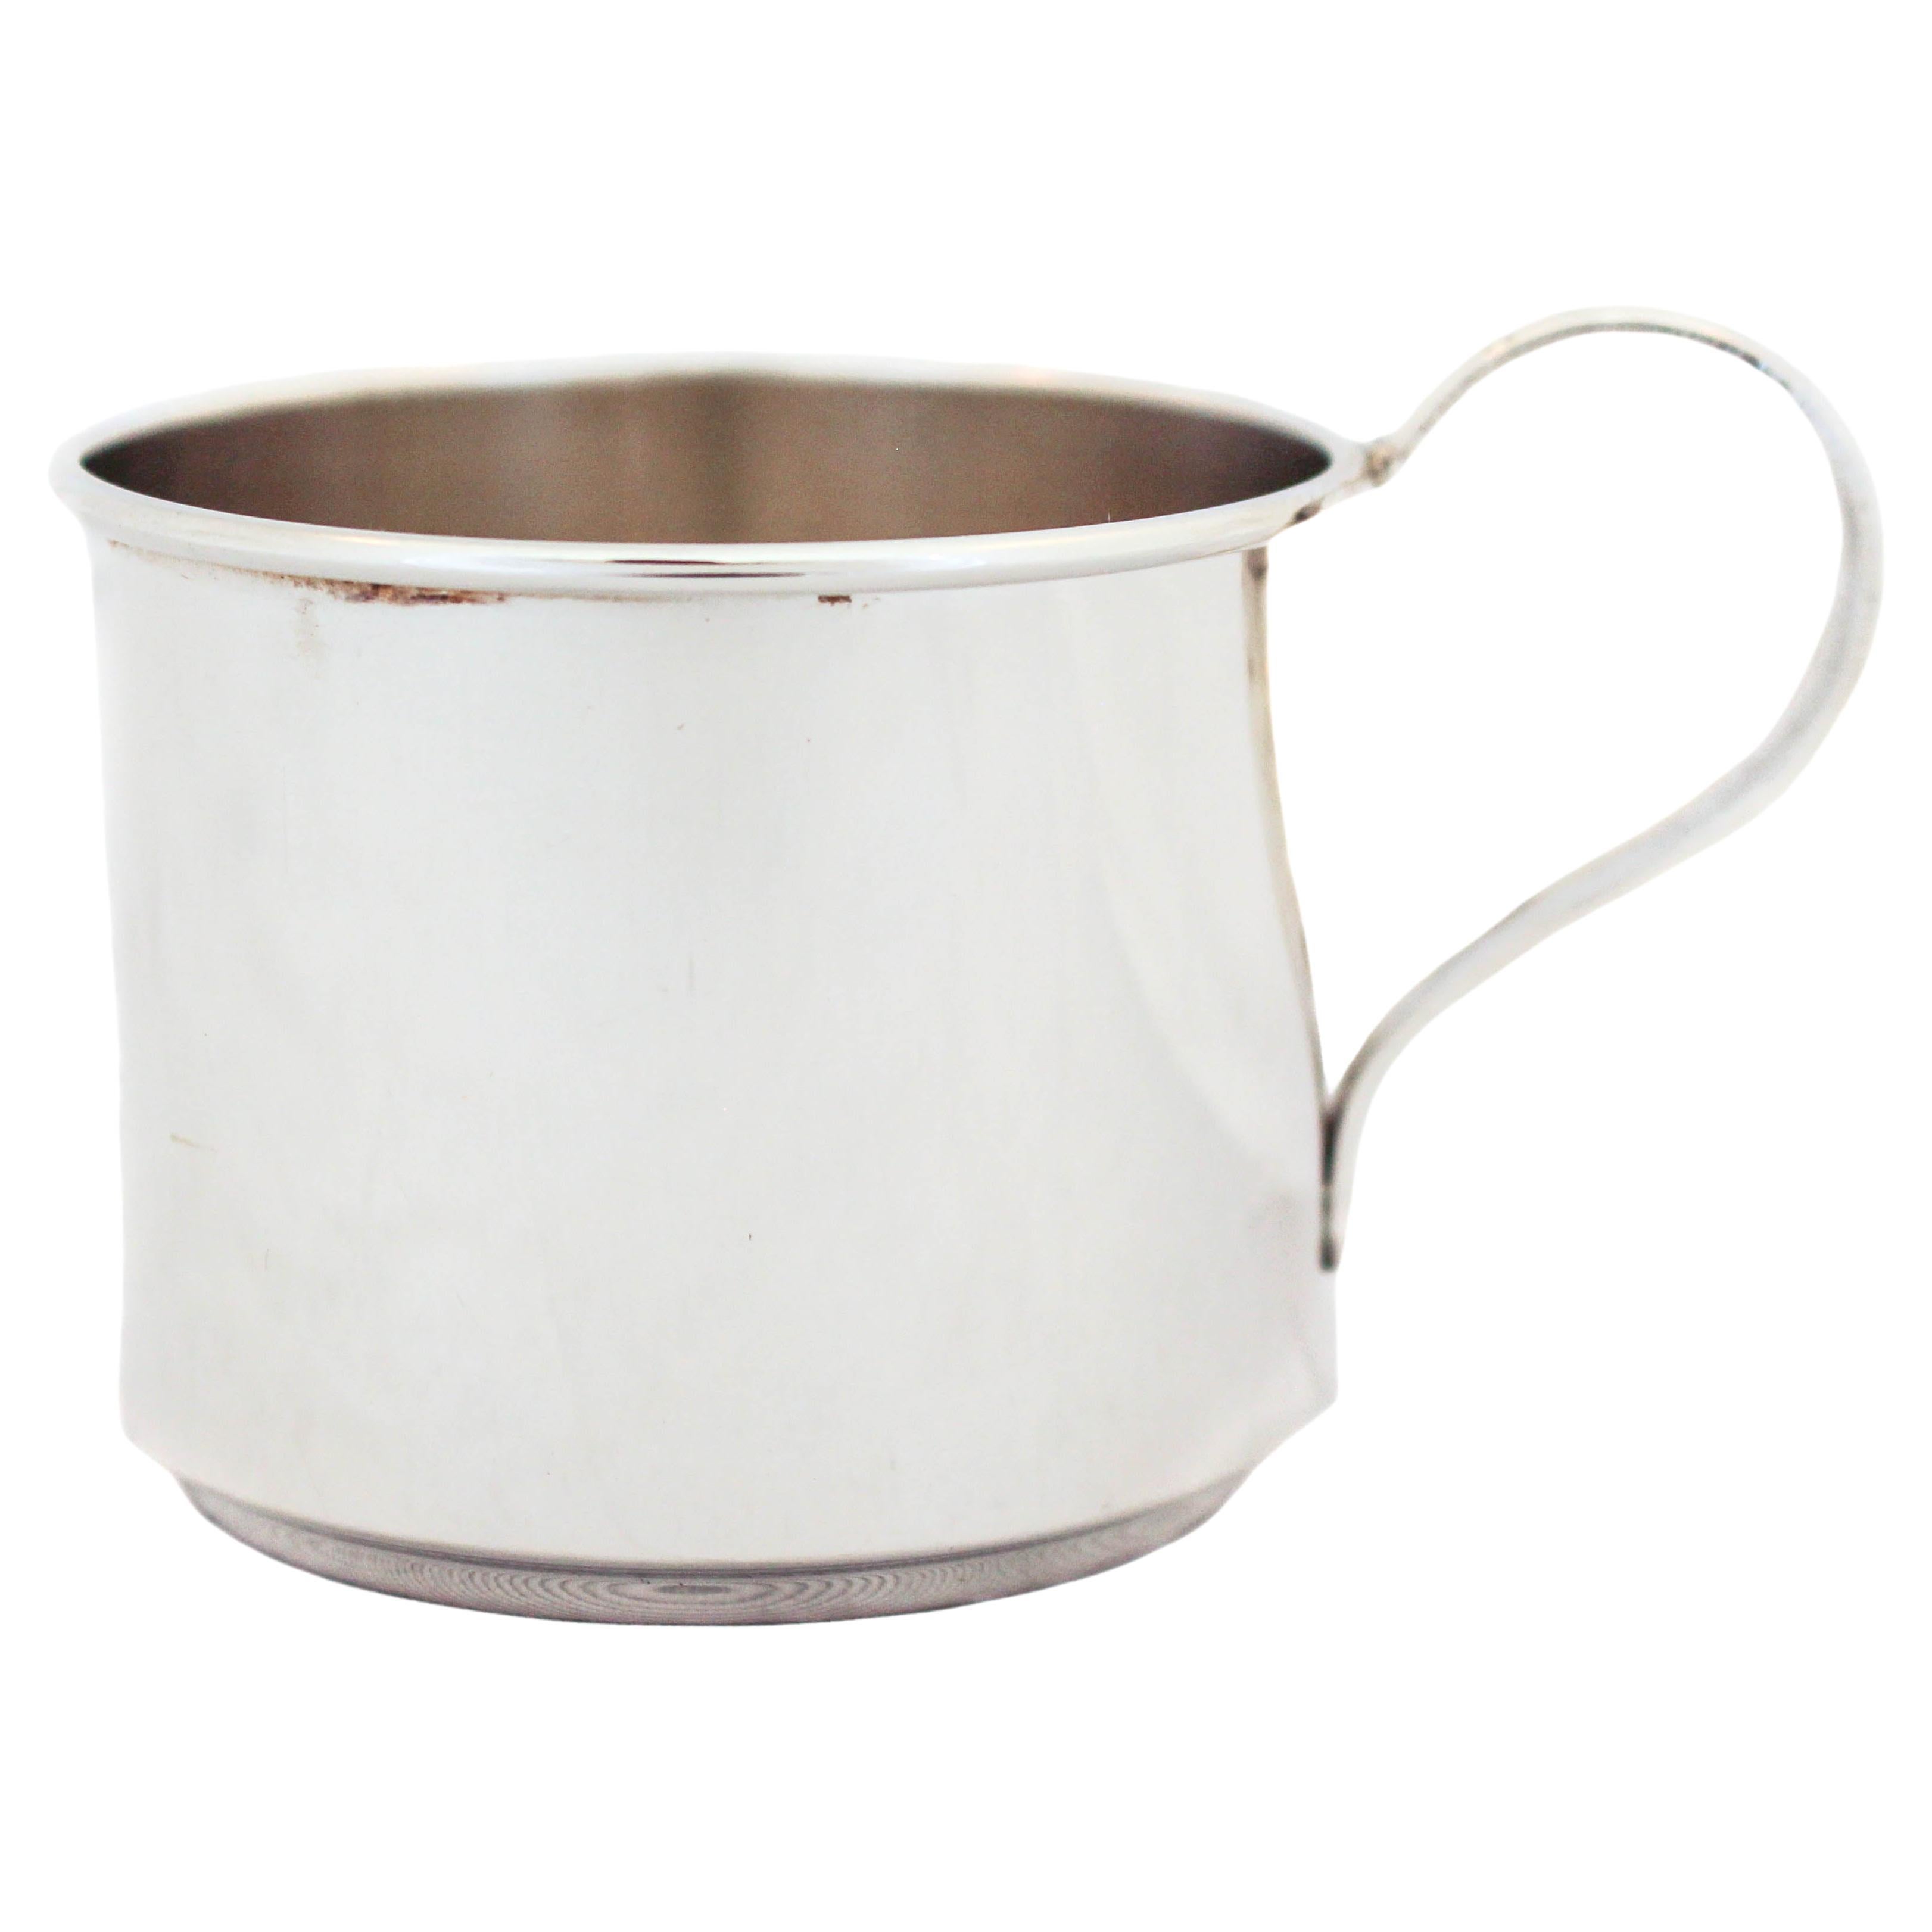 Sterling Silver Baby Cup